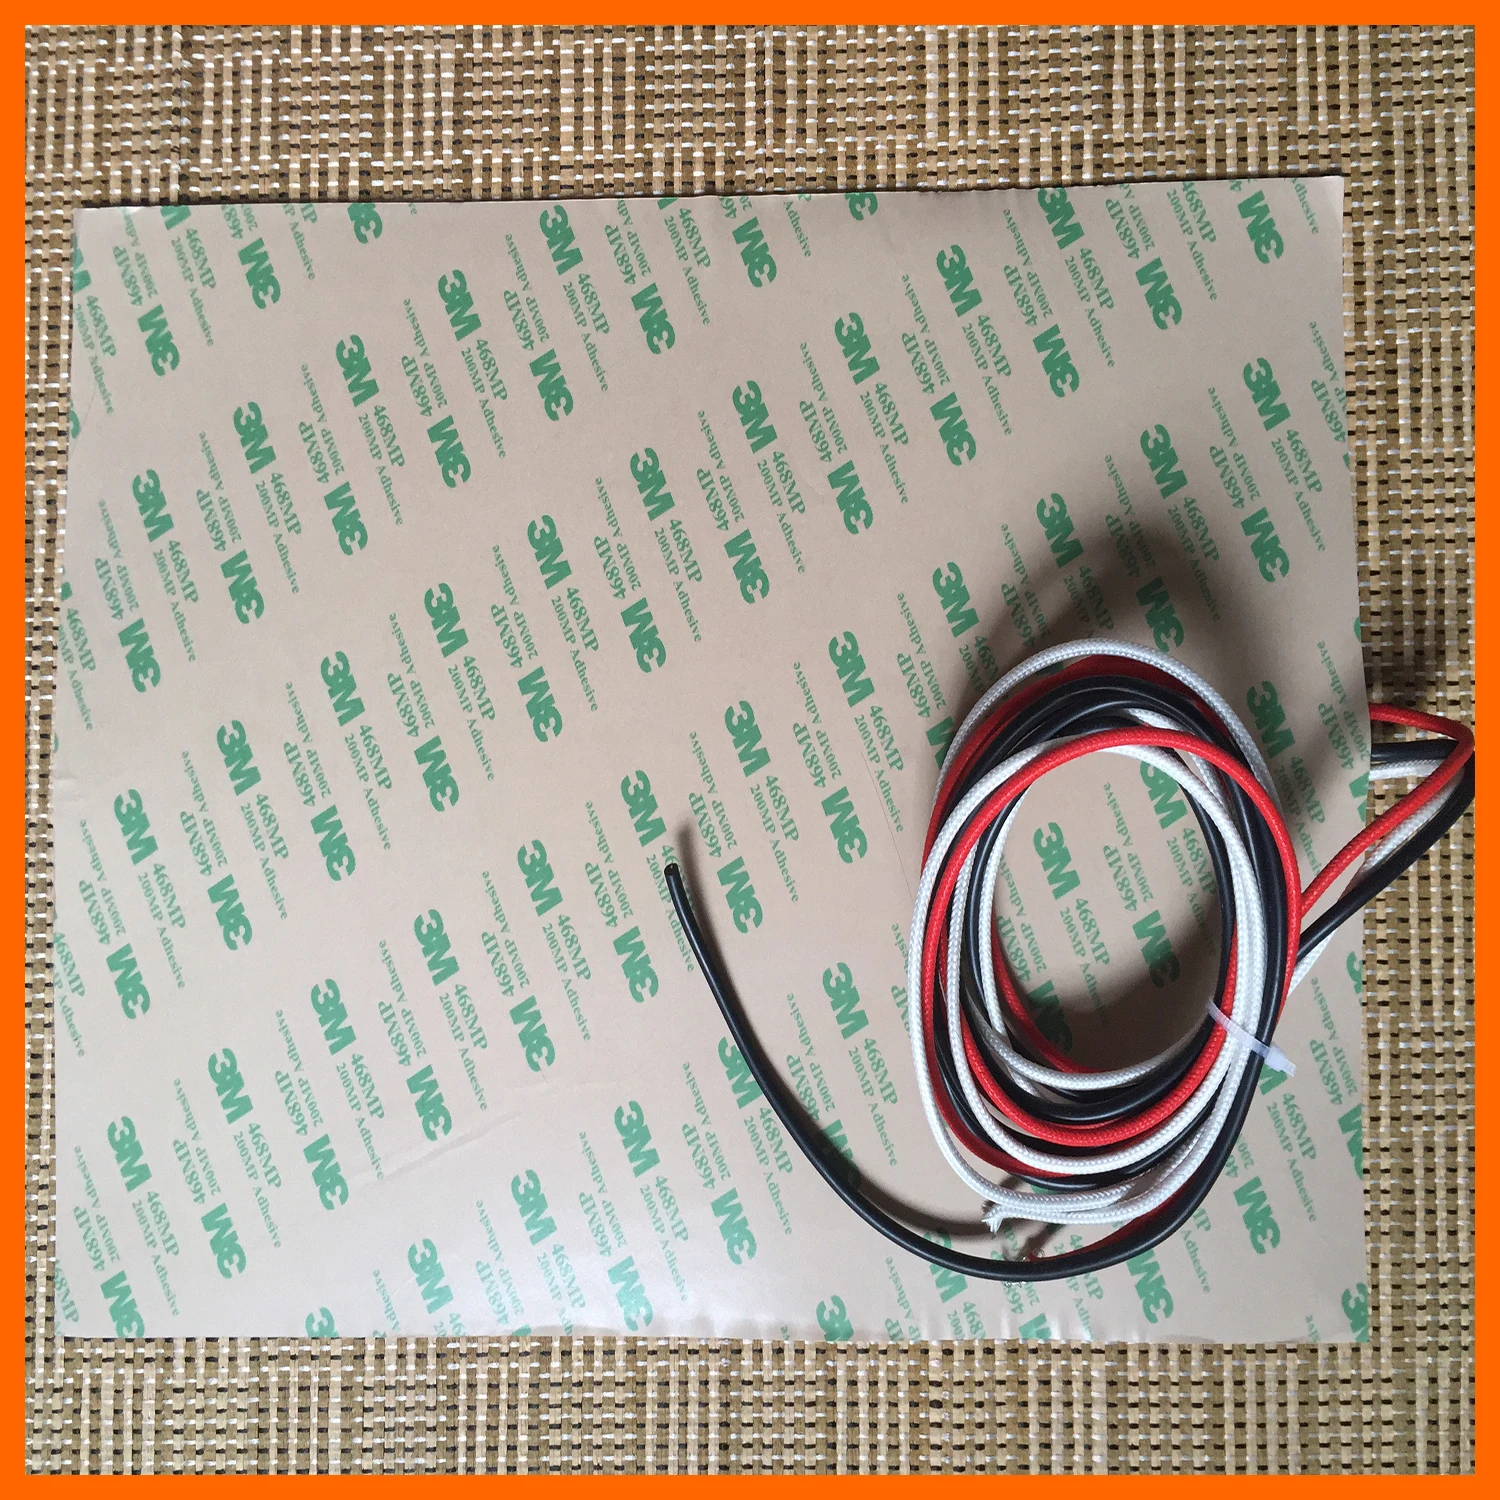 Heater Pad Silicone Rubber Heater Carpet For 3D Printer Heat Bed Warming Electric Pads Red Waterproof 200x300mm 220v 750w